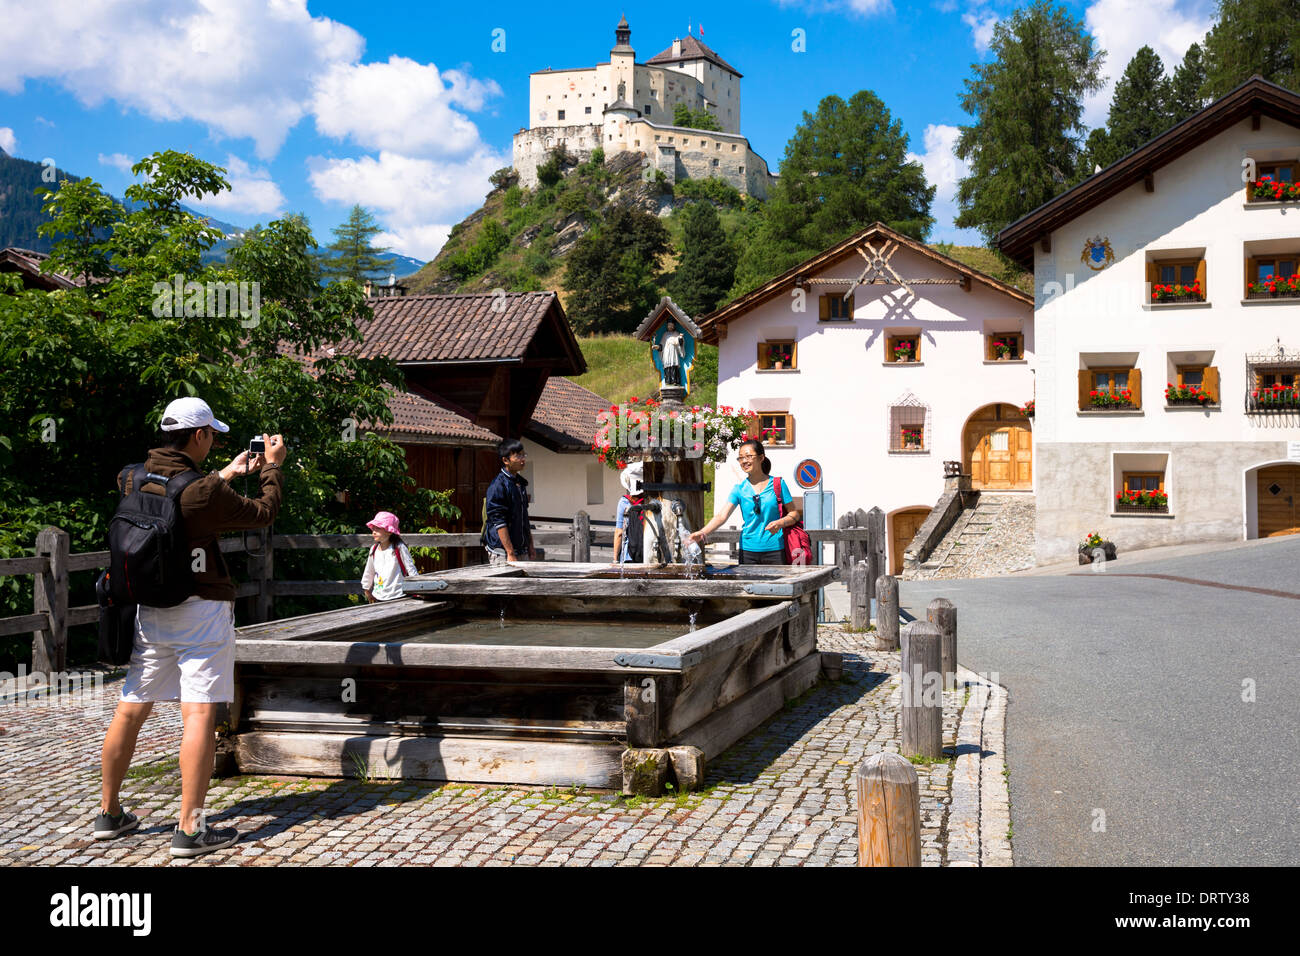 Tourists on a visit toTarasp Castle in the Lower Engadine Valley, Switzerland Stock Photo